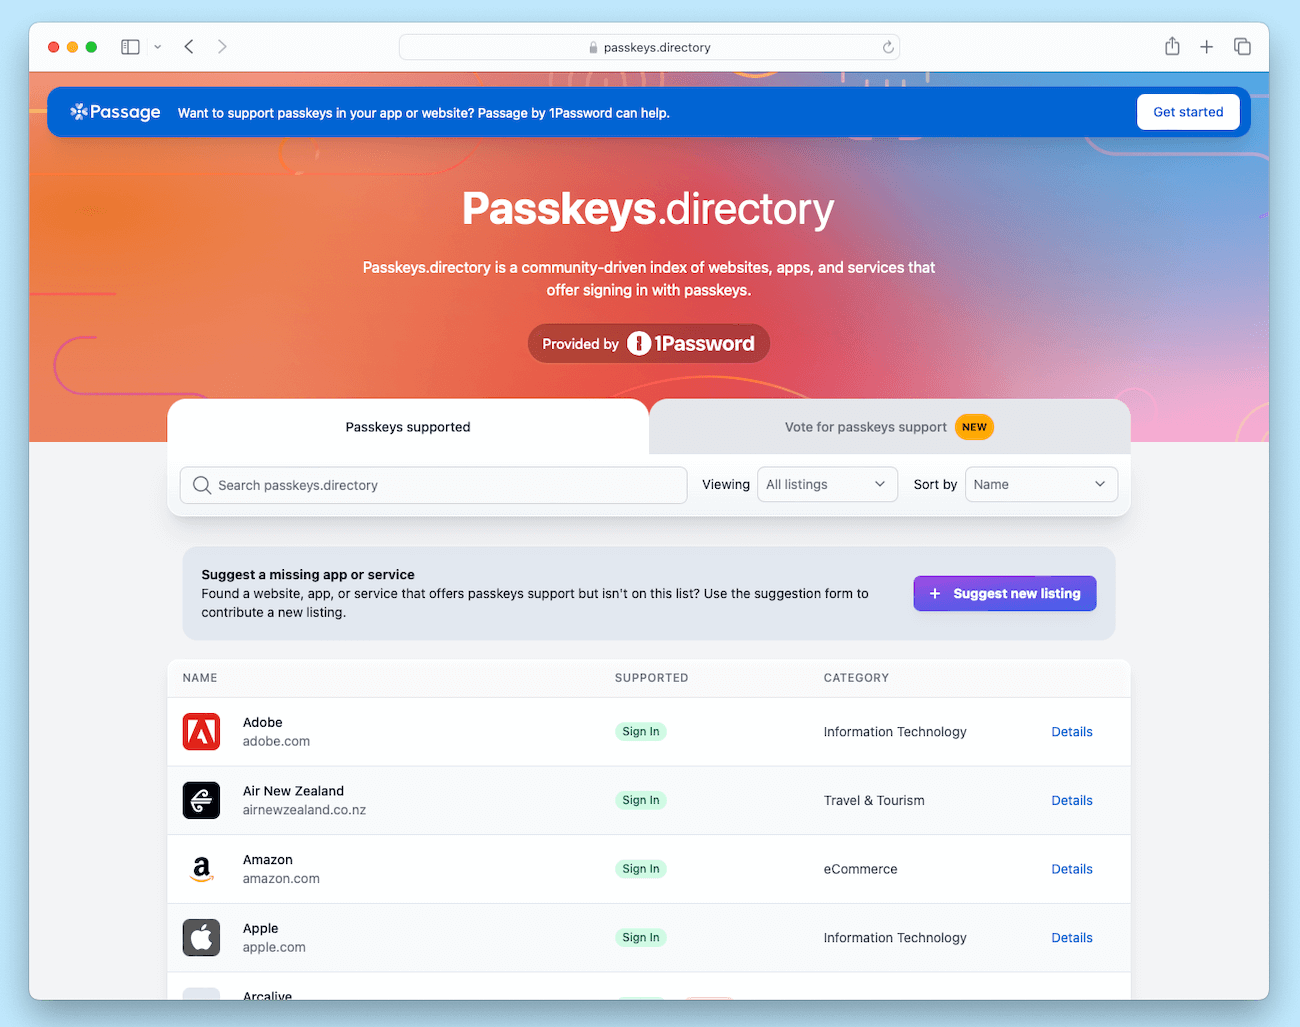 The passkeys.directory website showing a list of services that currently support passkeys.